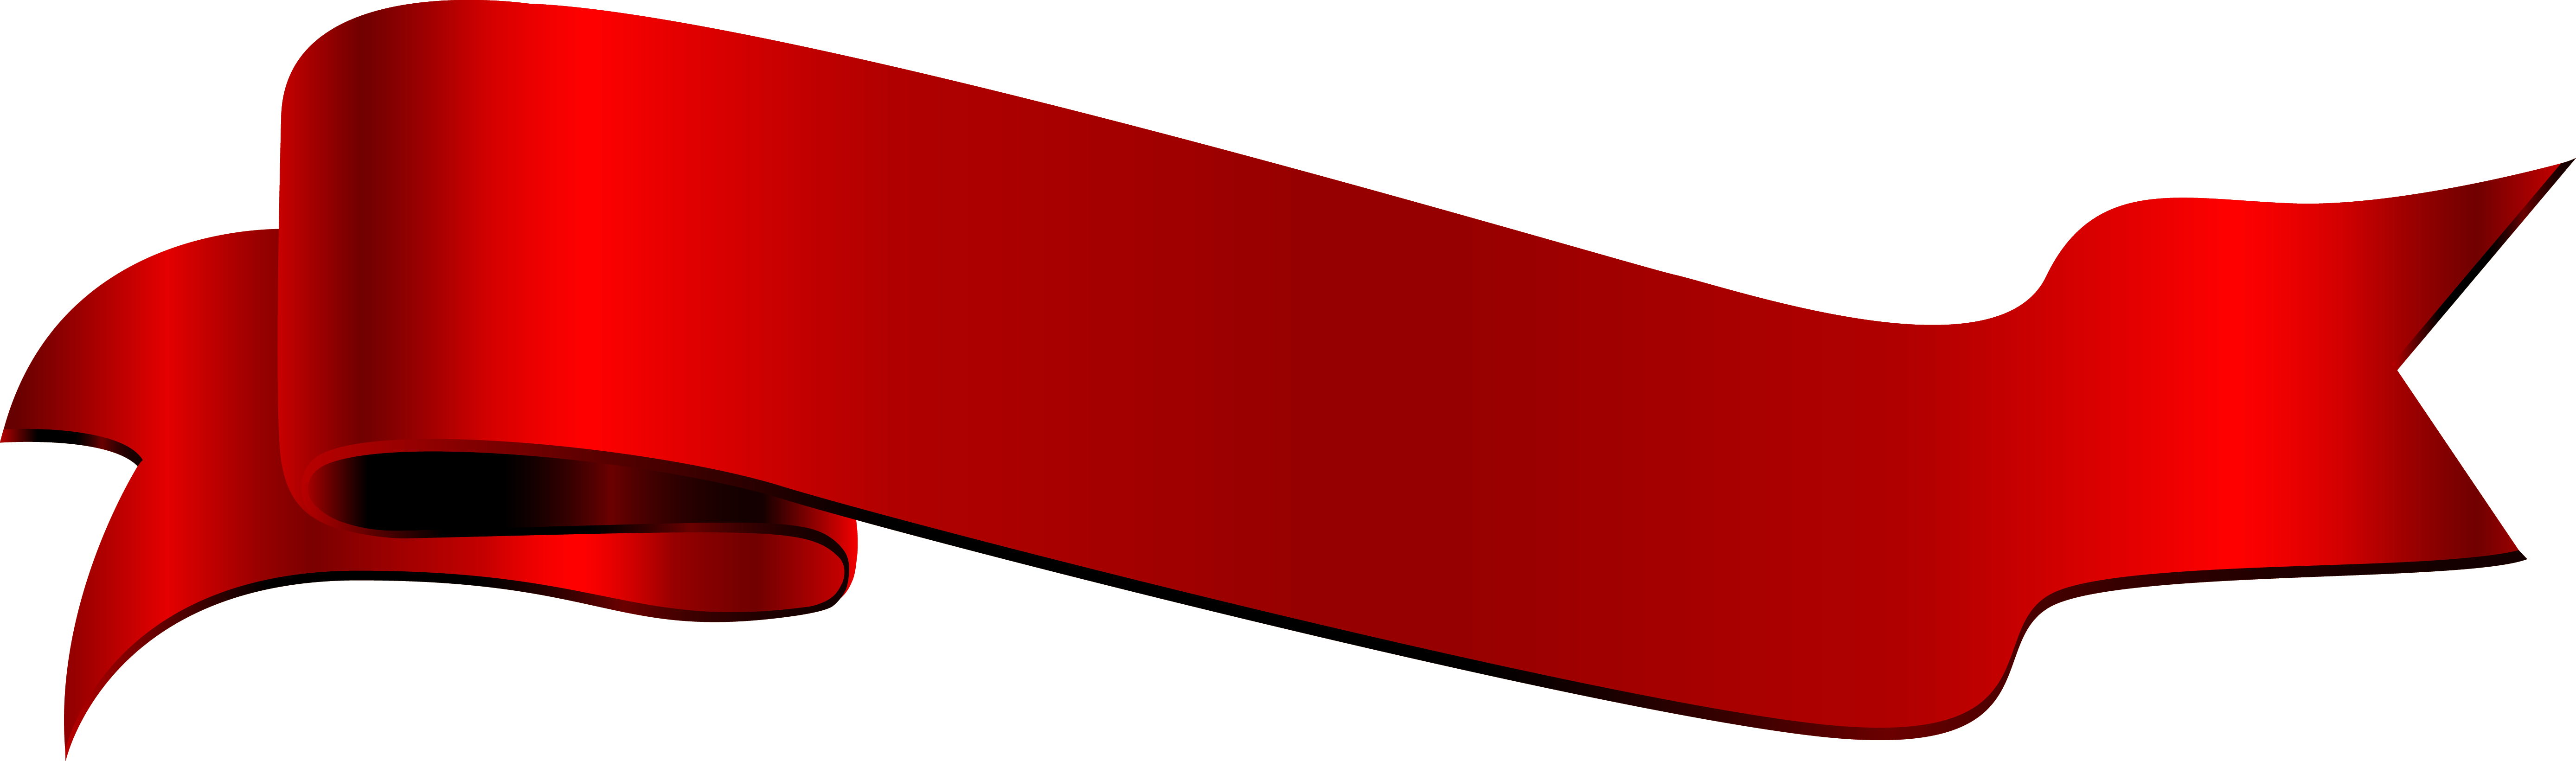 Red Ribbon Banner Graphic PNG image